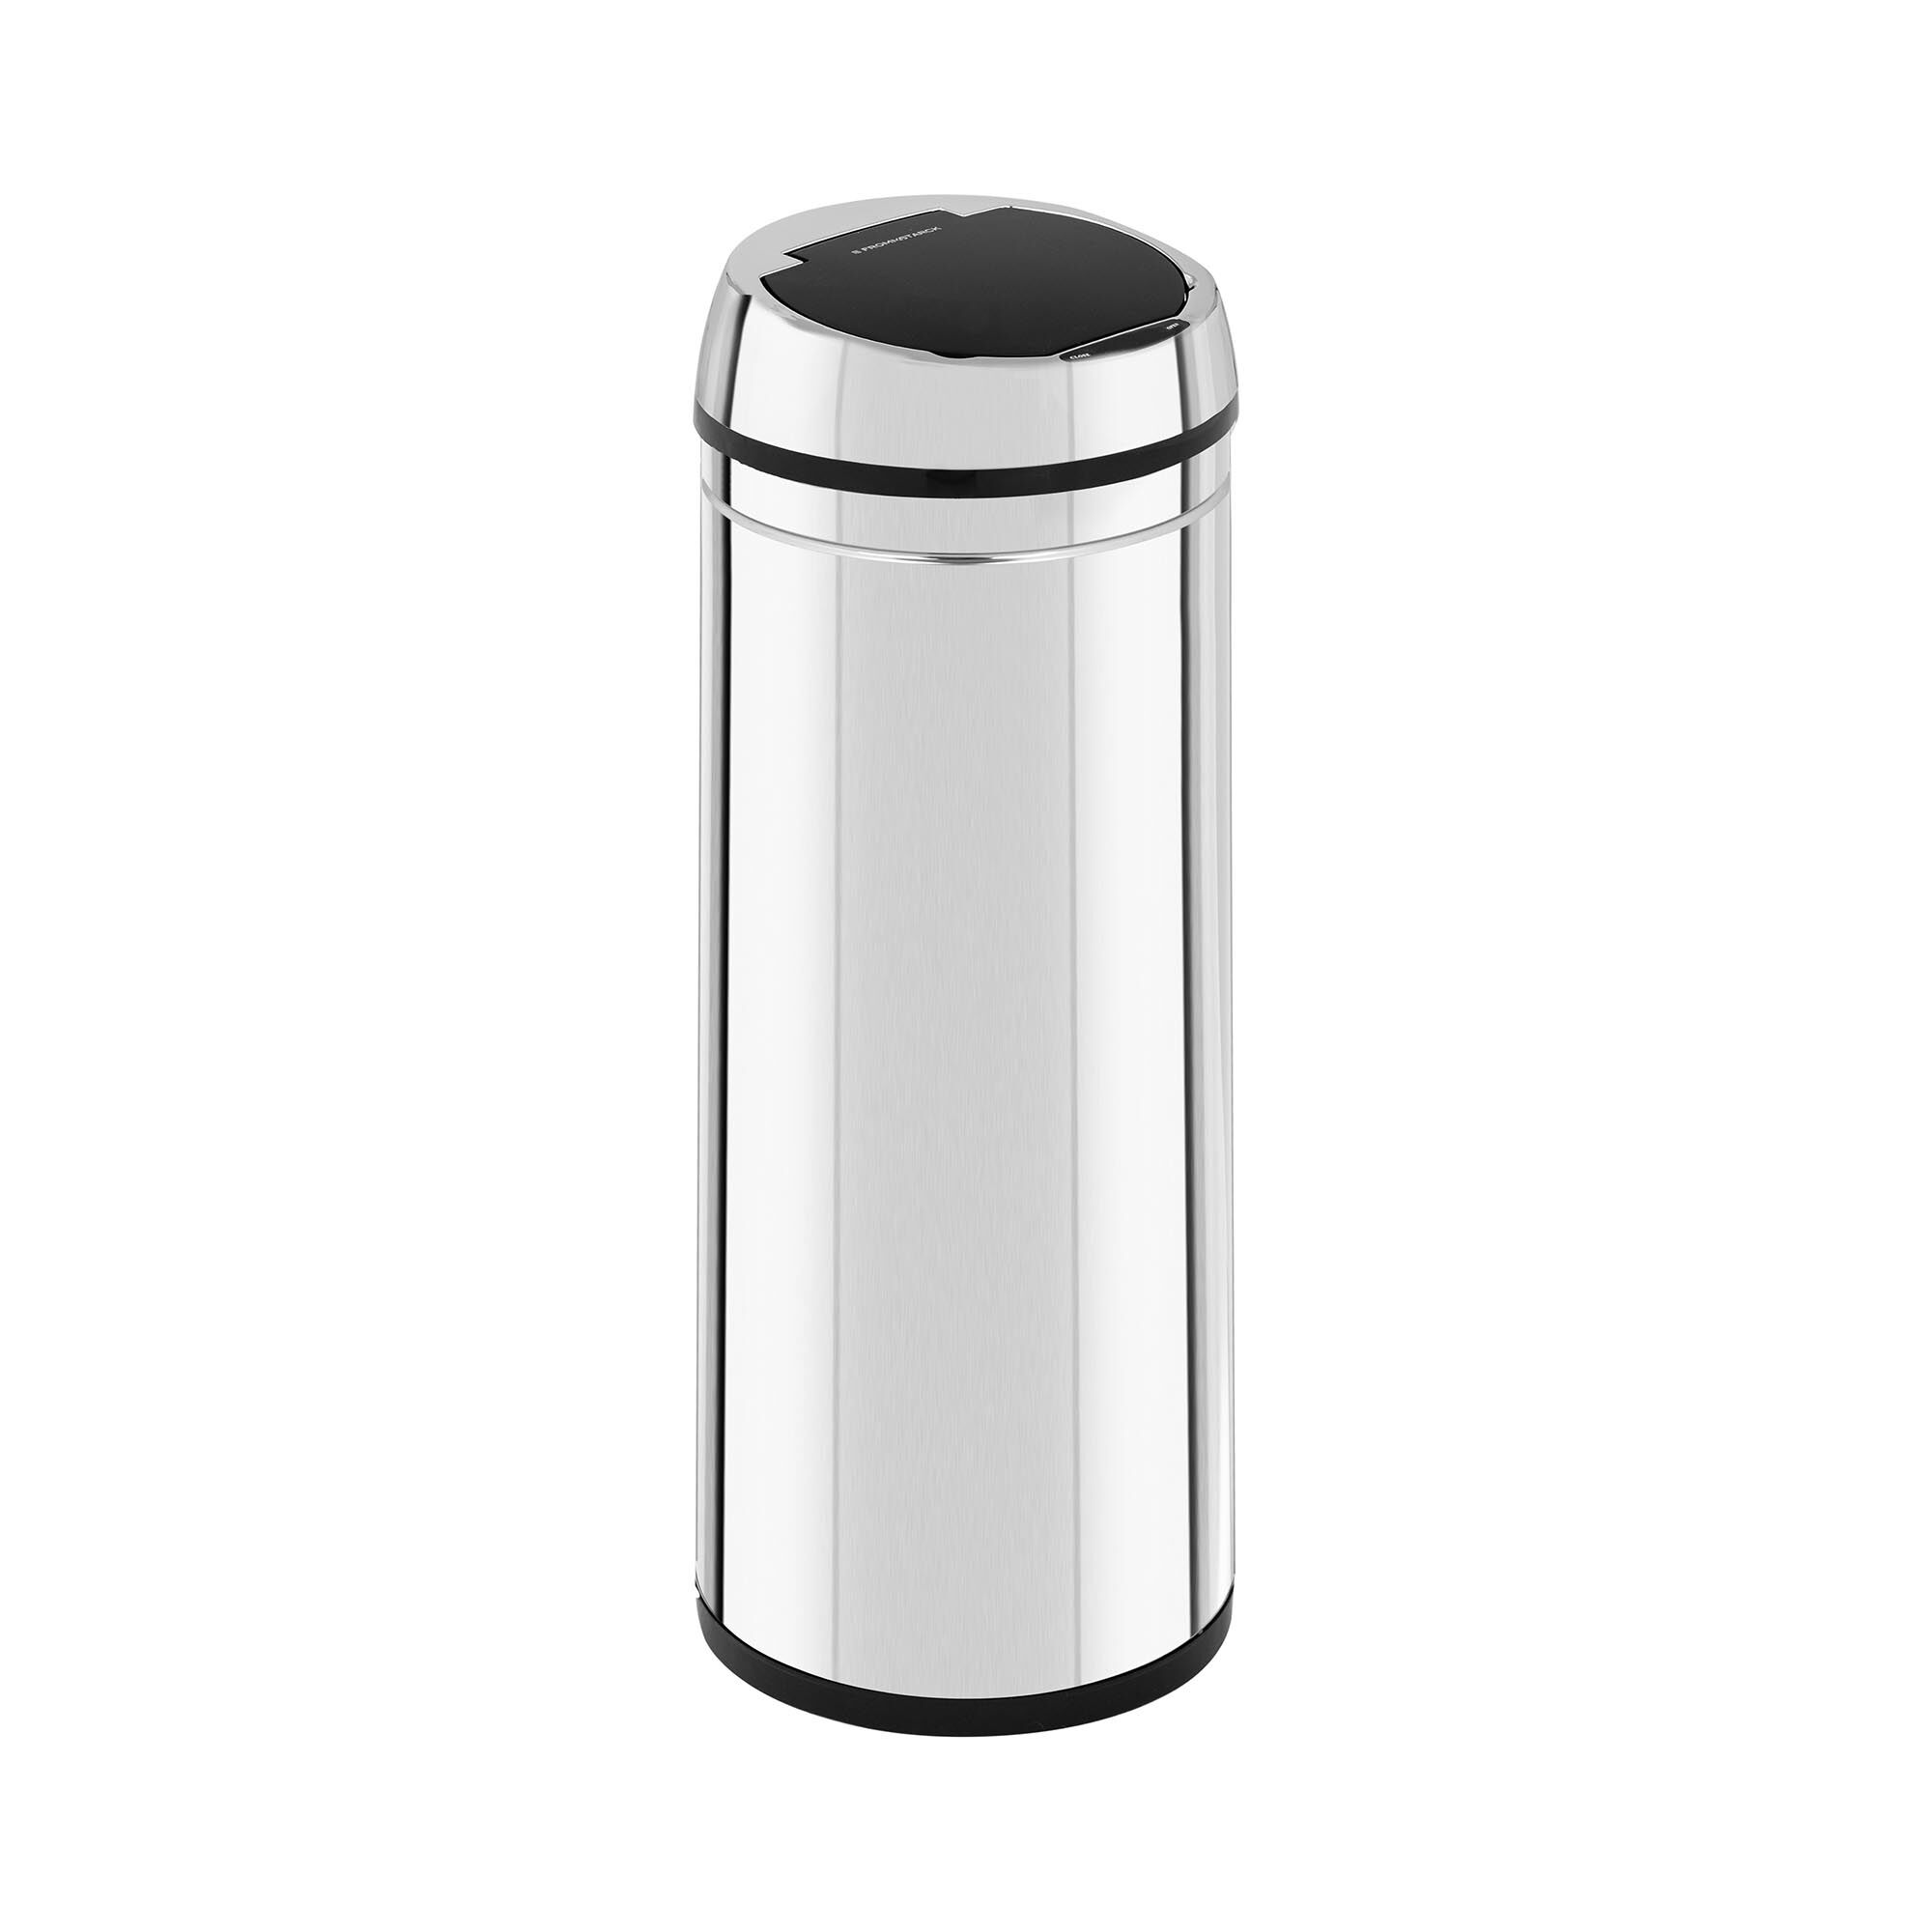 Fromm & Starck Sensor Trash Can - 22 L - round